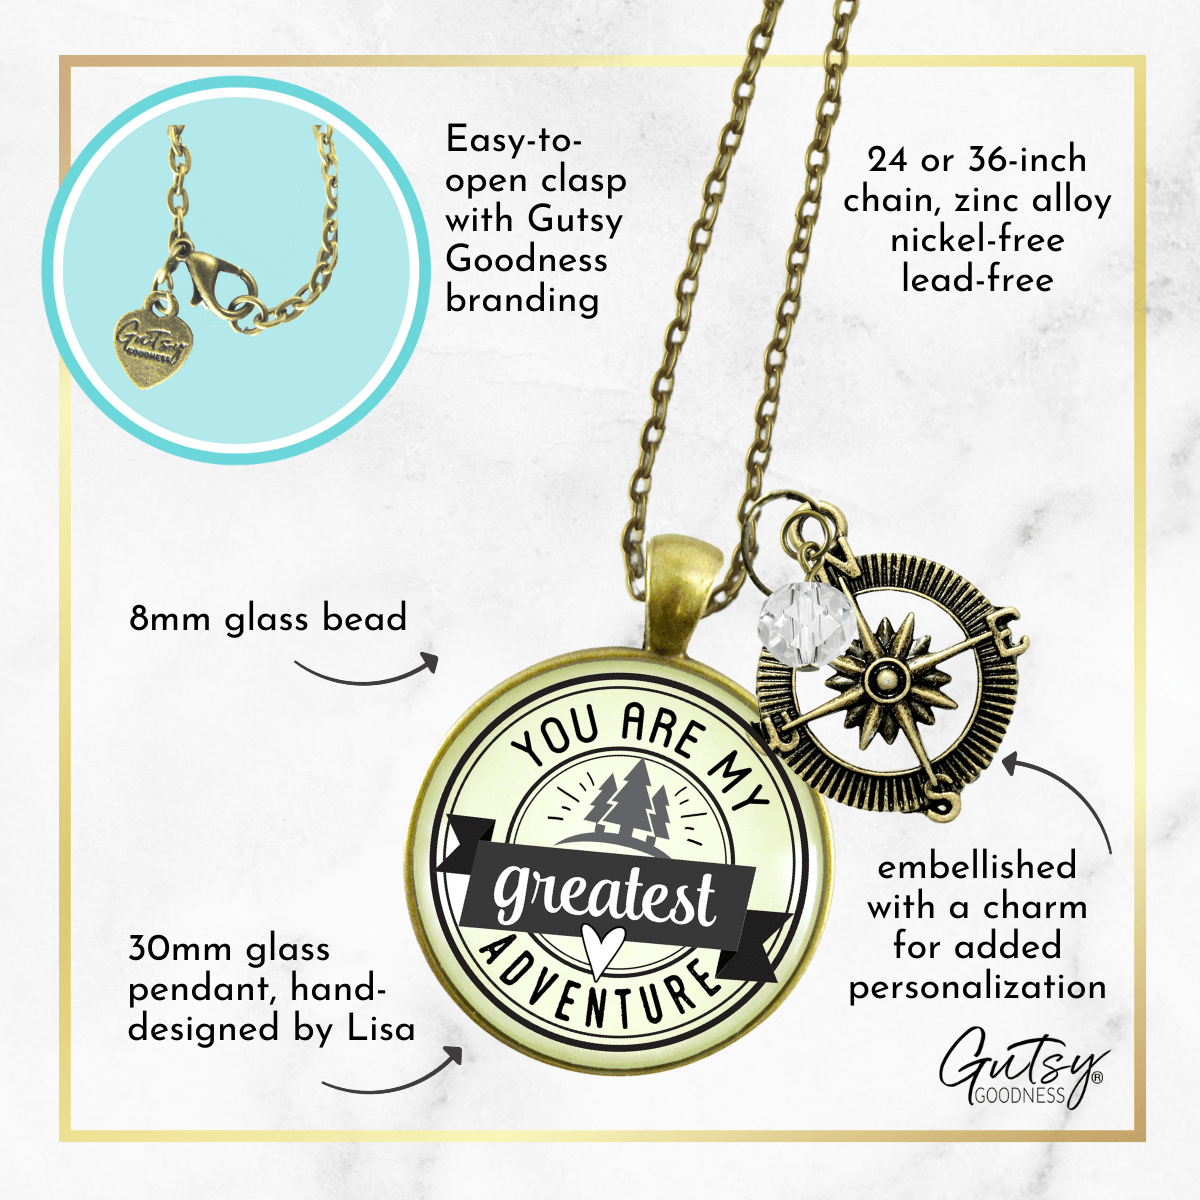 Gutsy Goodness You are My Greatest Adventure Compass Necklace Romantic Couple Gift - Gutsy Goodness;You Are My Greatest Adventure Compass Necklace Romantic Couple Gift - Gutsy Goodness Handmade Jewelry Gifts